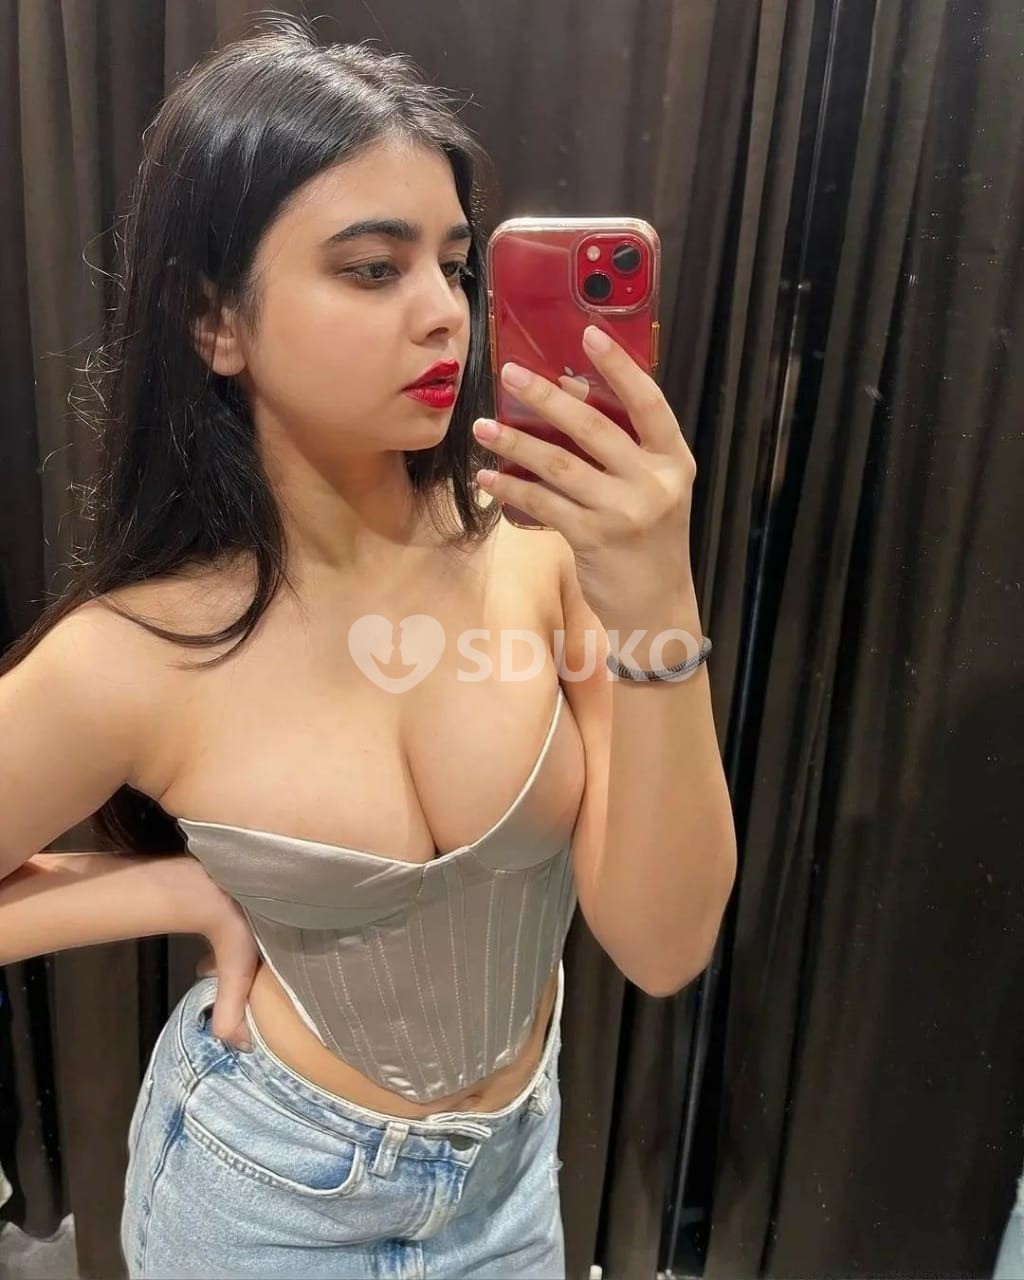 KATRAJ VIP TODAY LOW PRICE() ESCORT 🥰SERVICE 100% SAFE AND SECURE ANYTIME CALL ME 24 X 7 SERVICE AVAILABLE 100% SAFE